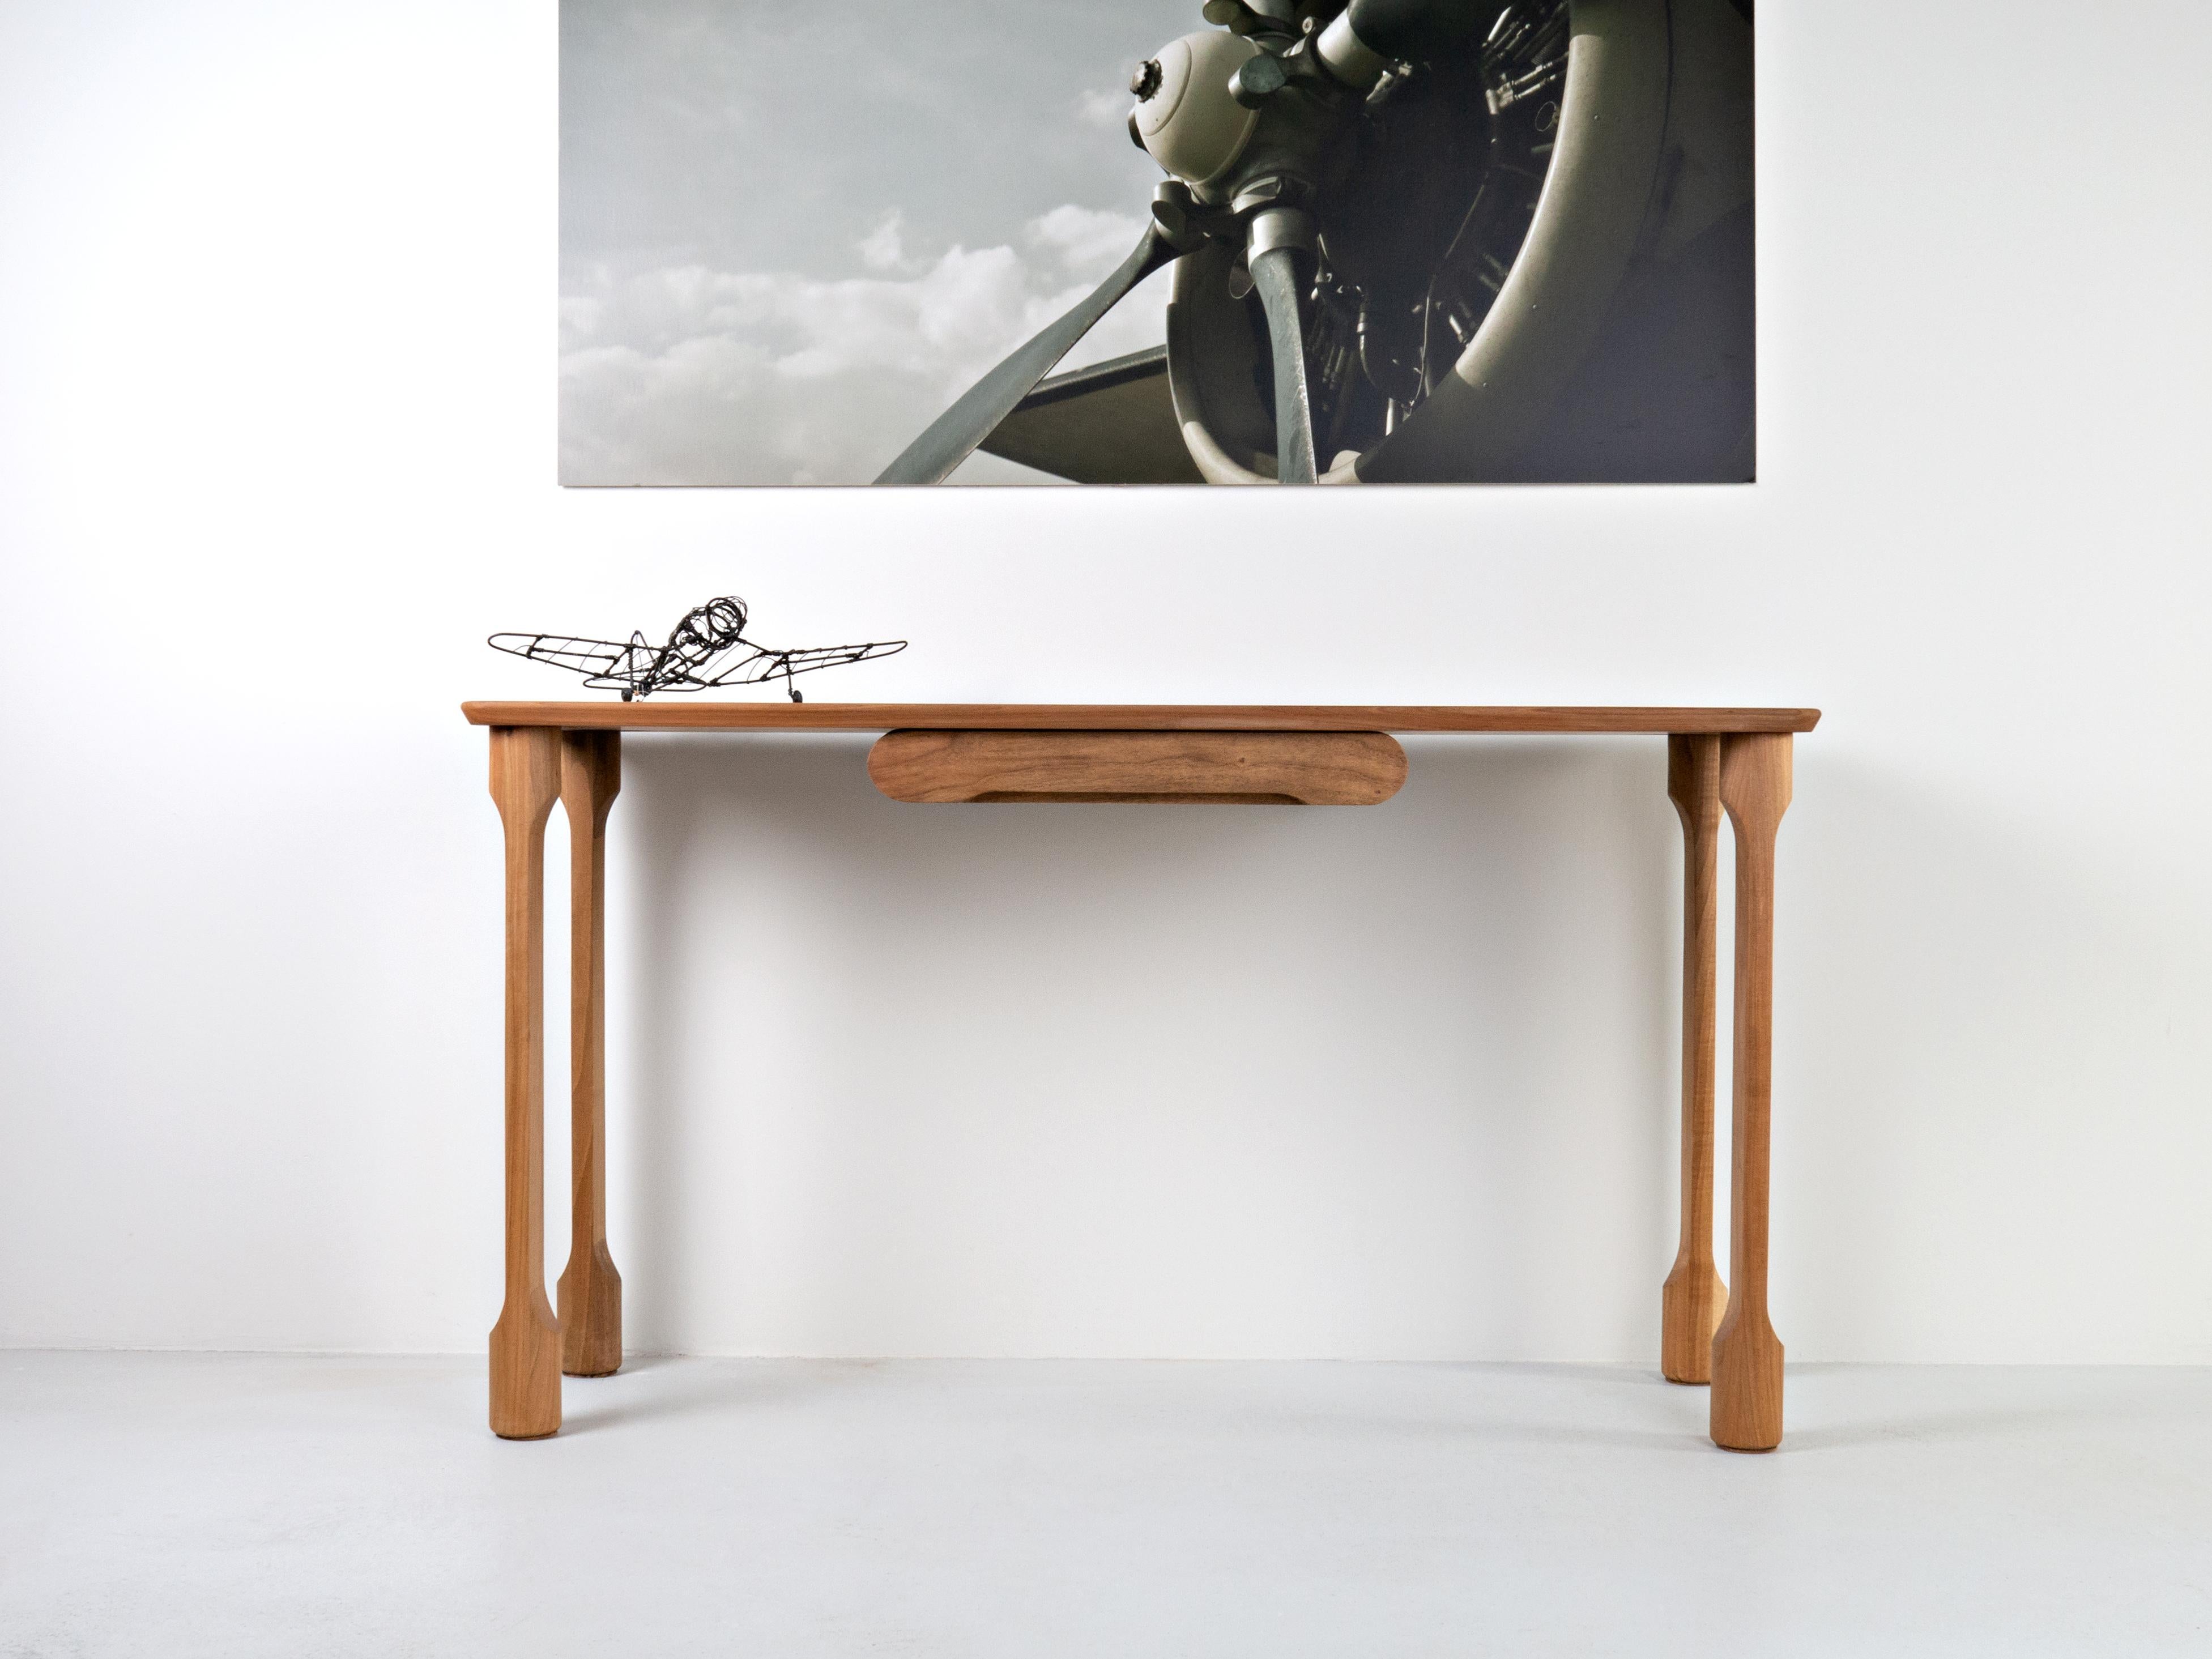 This so-called side table (in the four-legged variant) or console table (in the two-legged variant) fixed to the wall. It can be used as a dressing table in the sleeping area, as a mini desk in smaller spaces or as a kind of chest of drawers in the